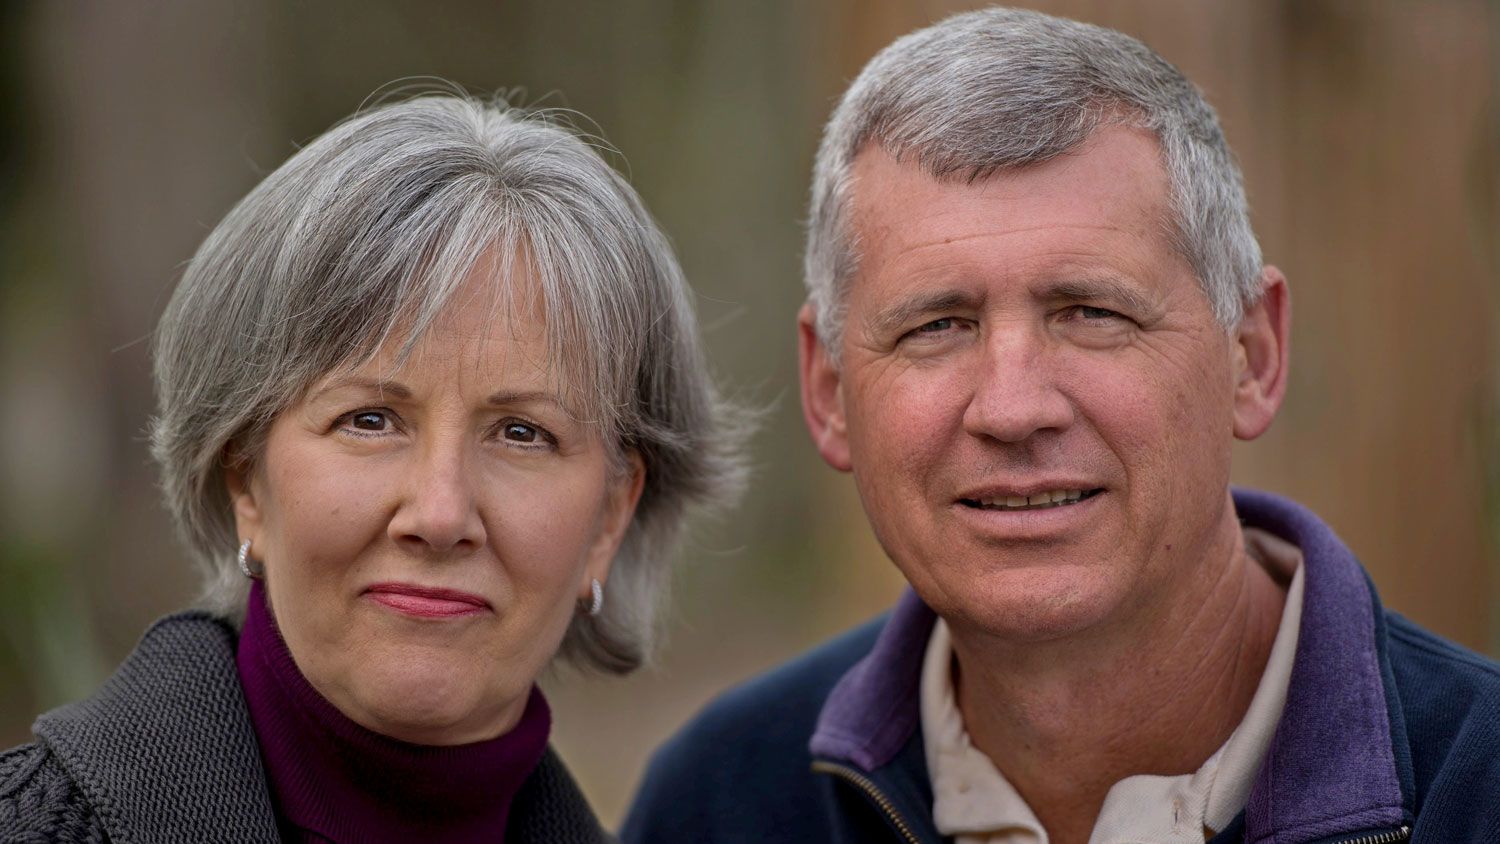 An older couple posing together for a photograph